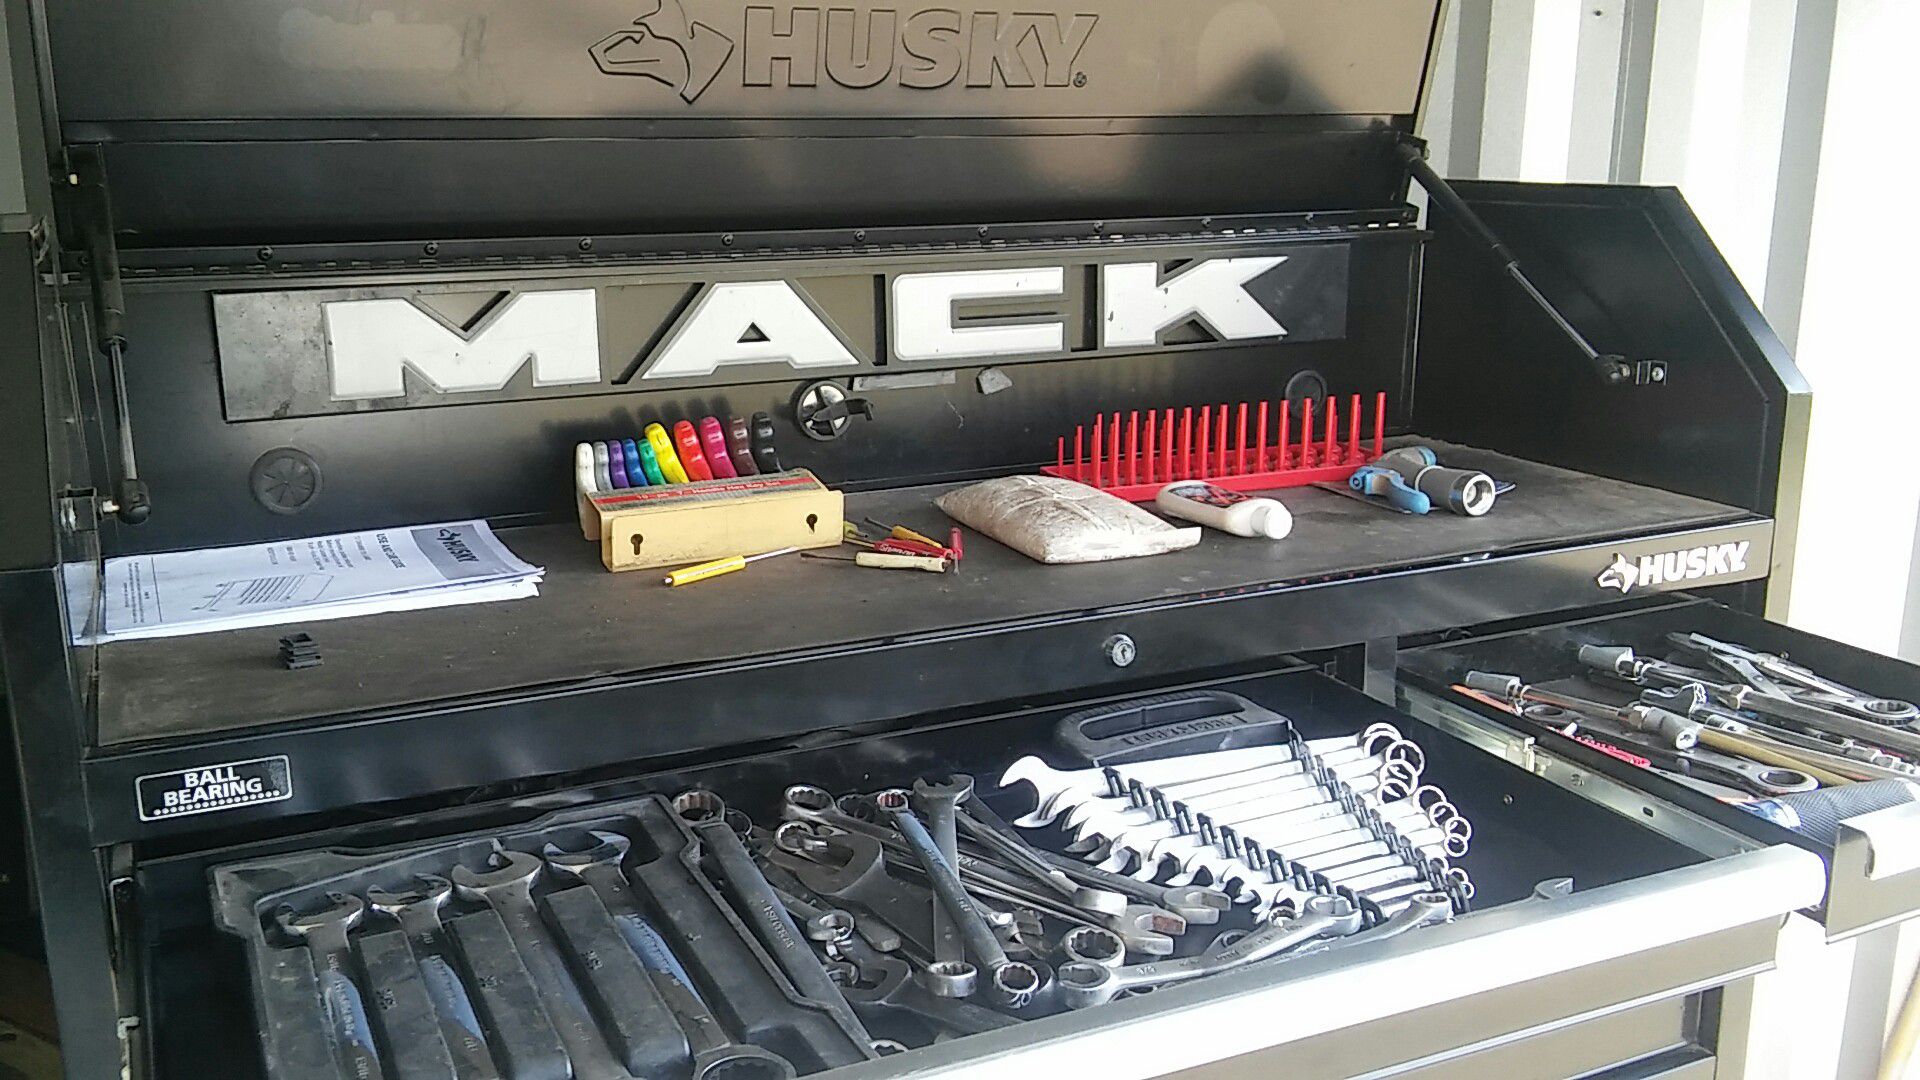 3 tool box's all the tools snap on Marco there is another box with all the sir tools not shown